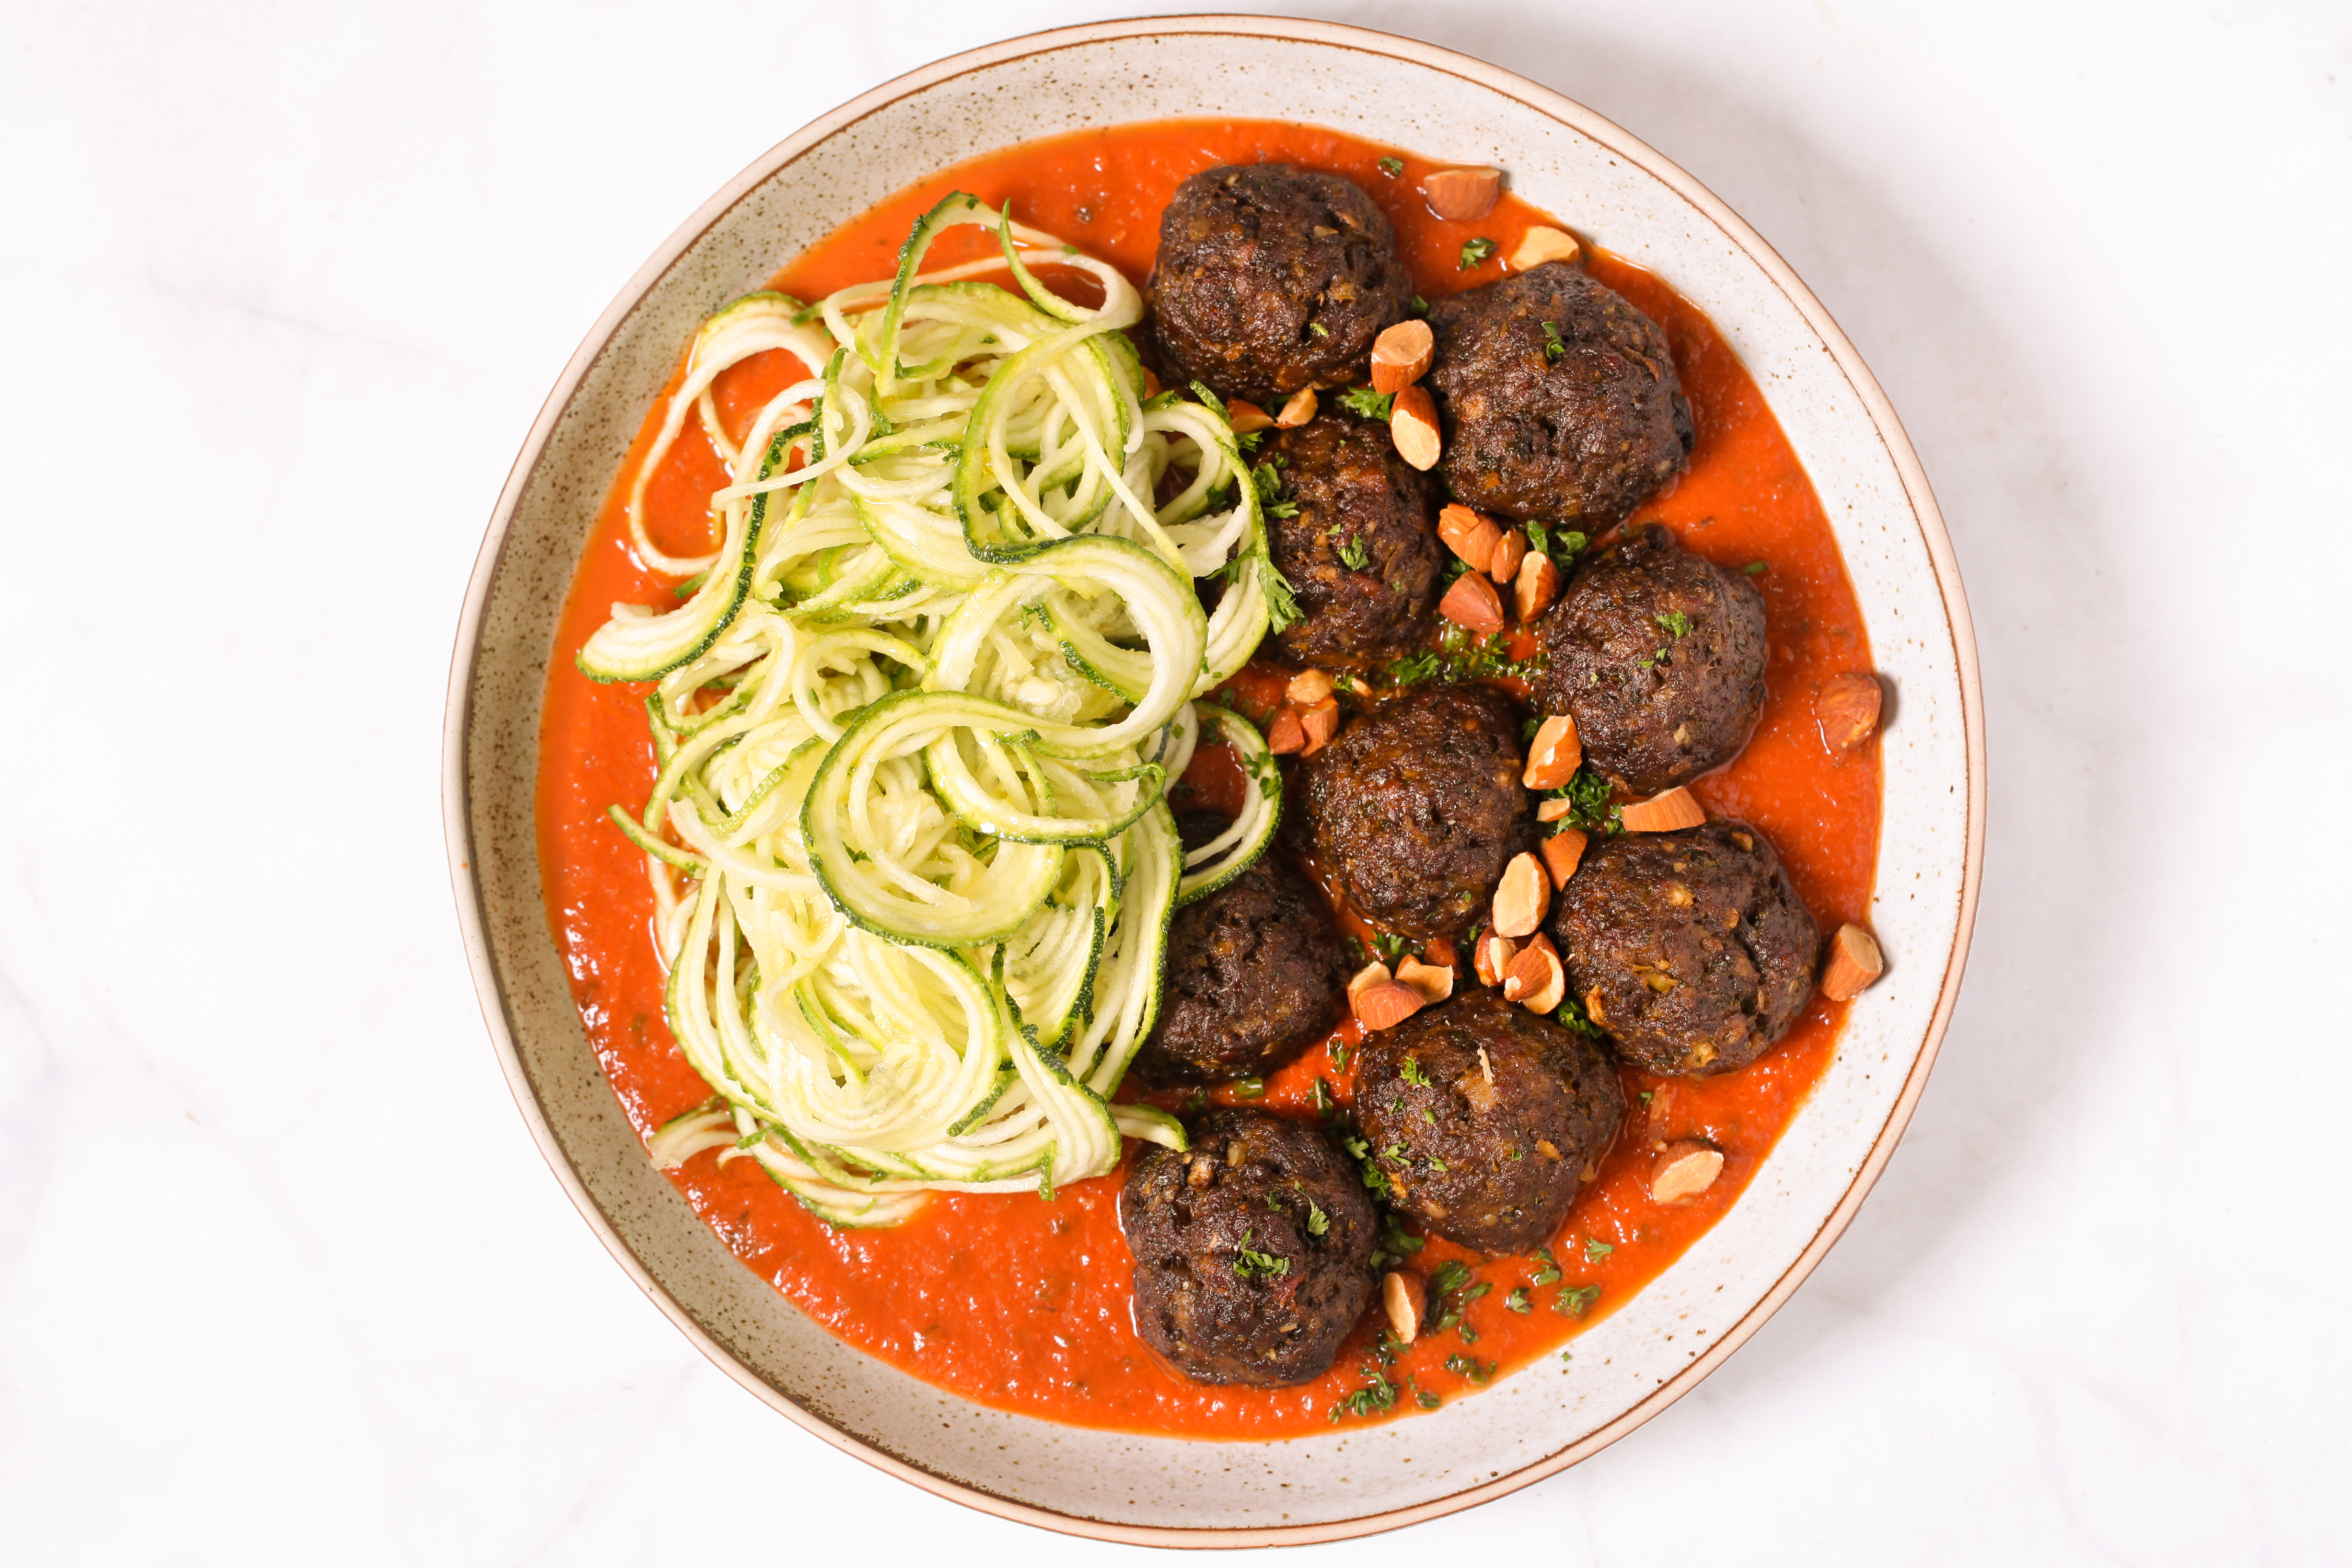 Beef, Kale & Bacon Meatballs with Zucchini Noodles